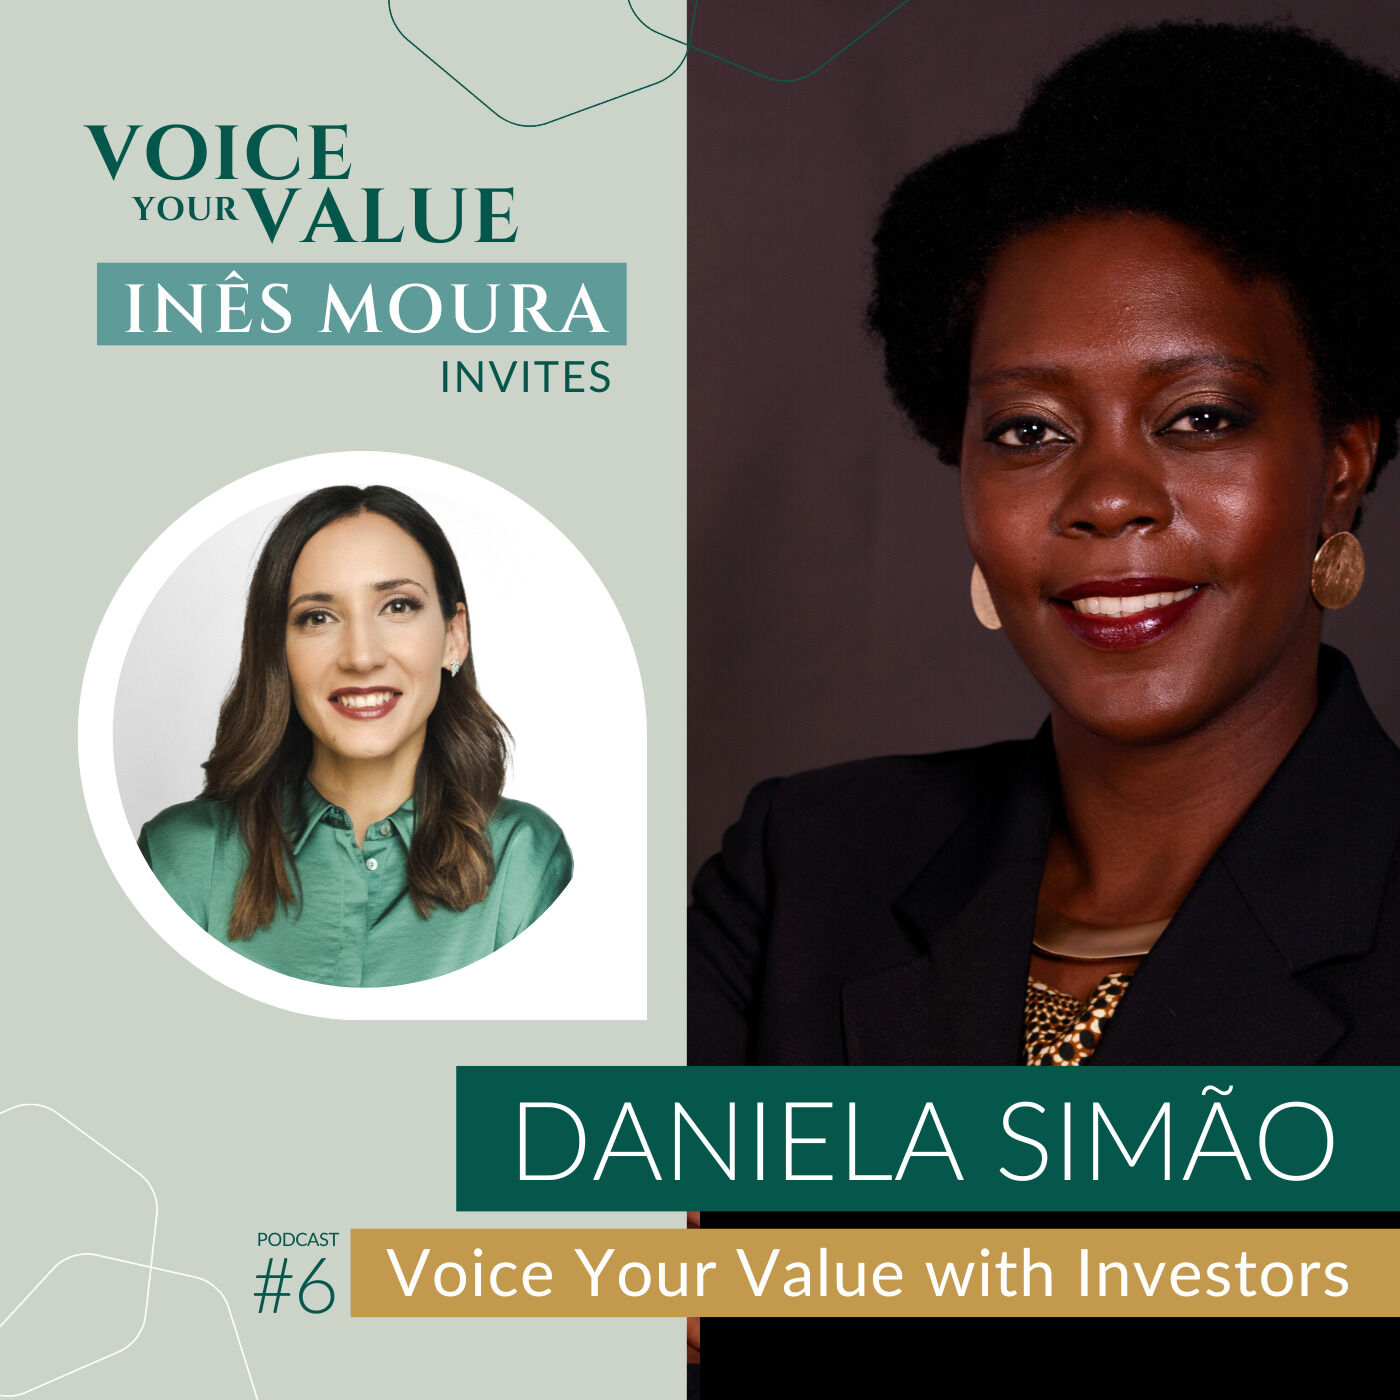 How to Voice Your Value with Investors?